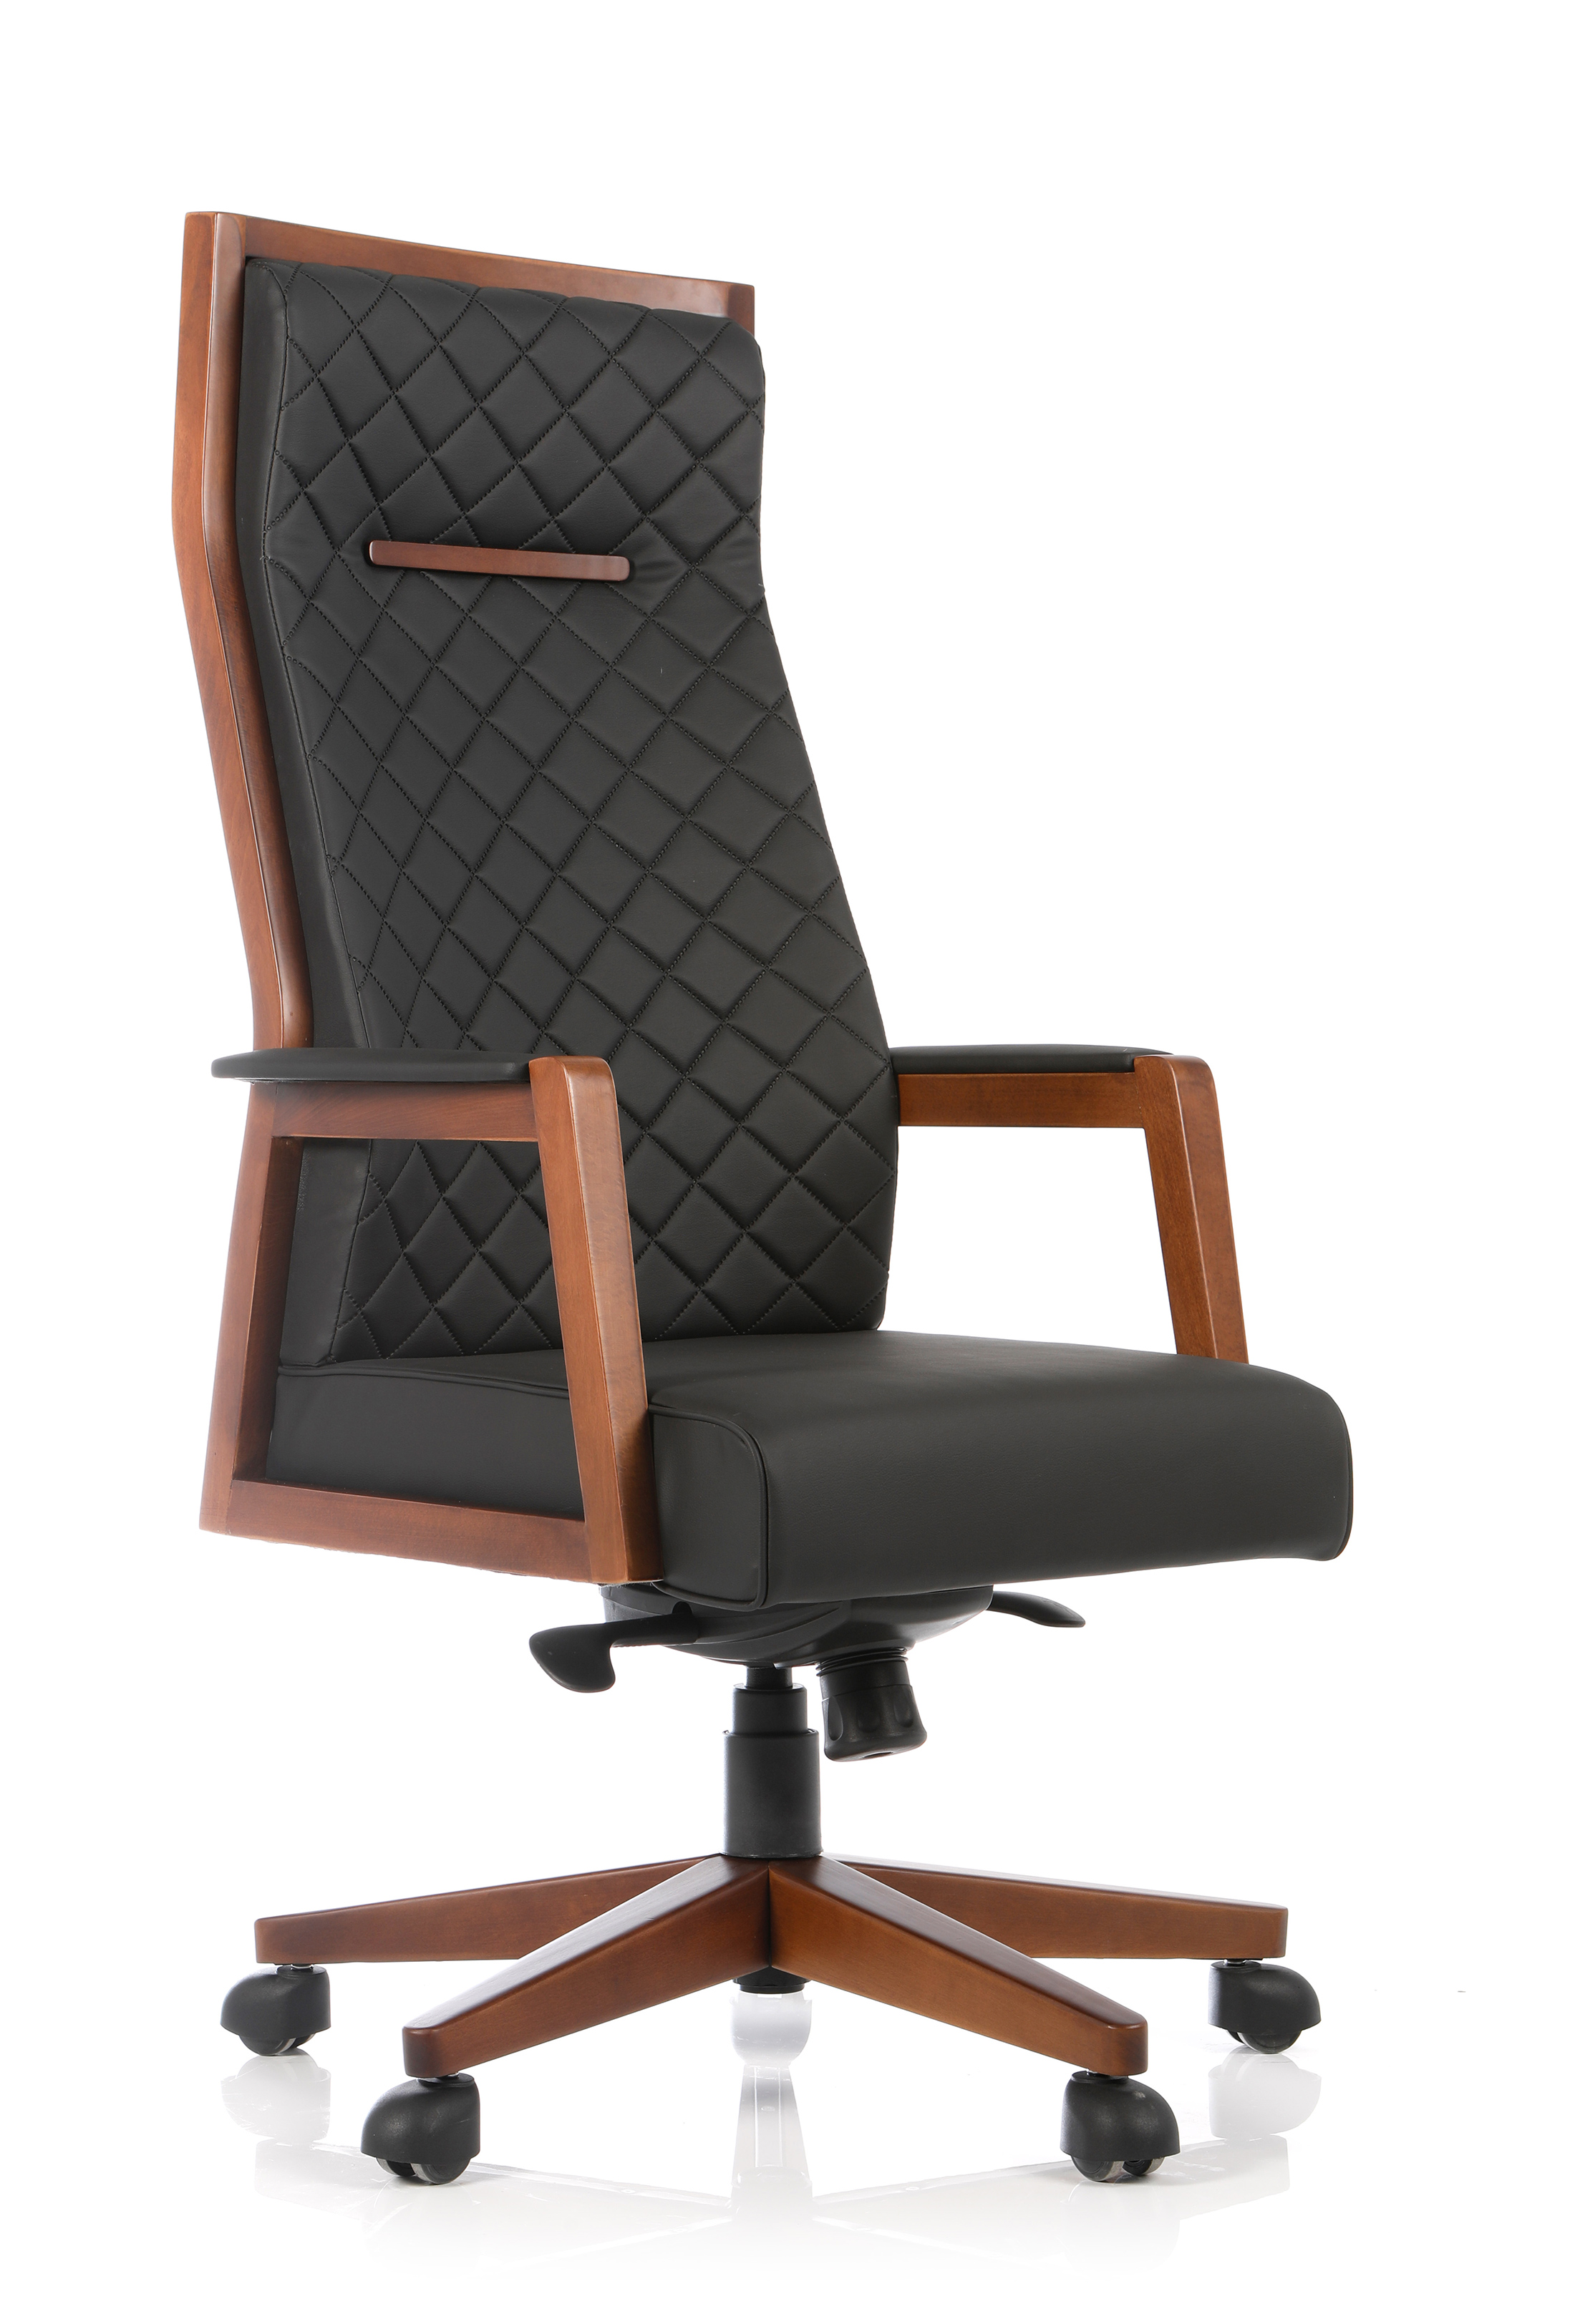 MASIF PLUS 000N MANAGER CHAIR